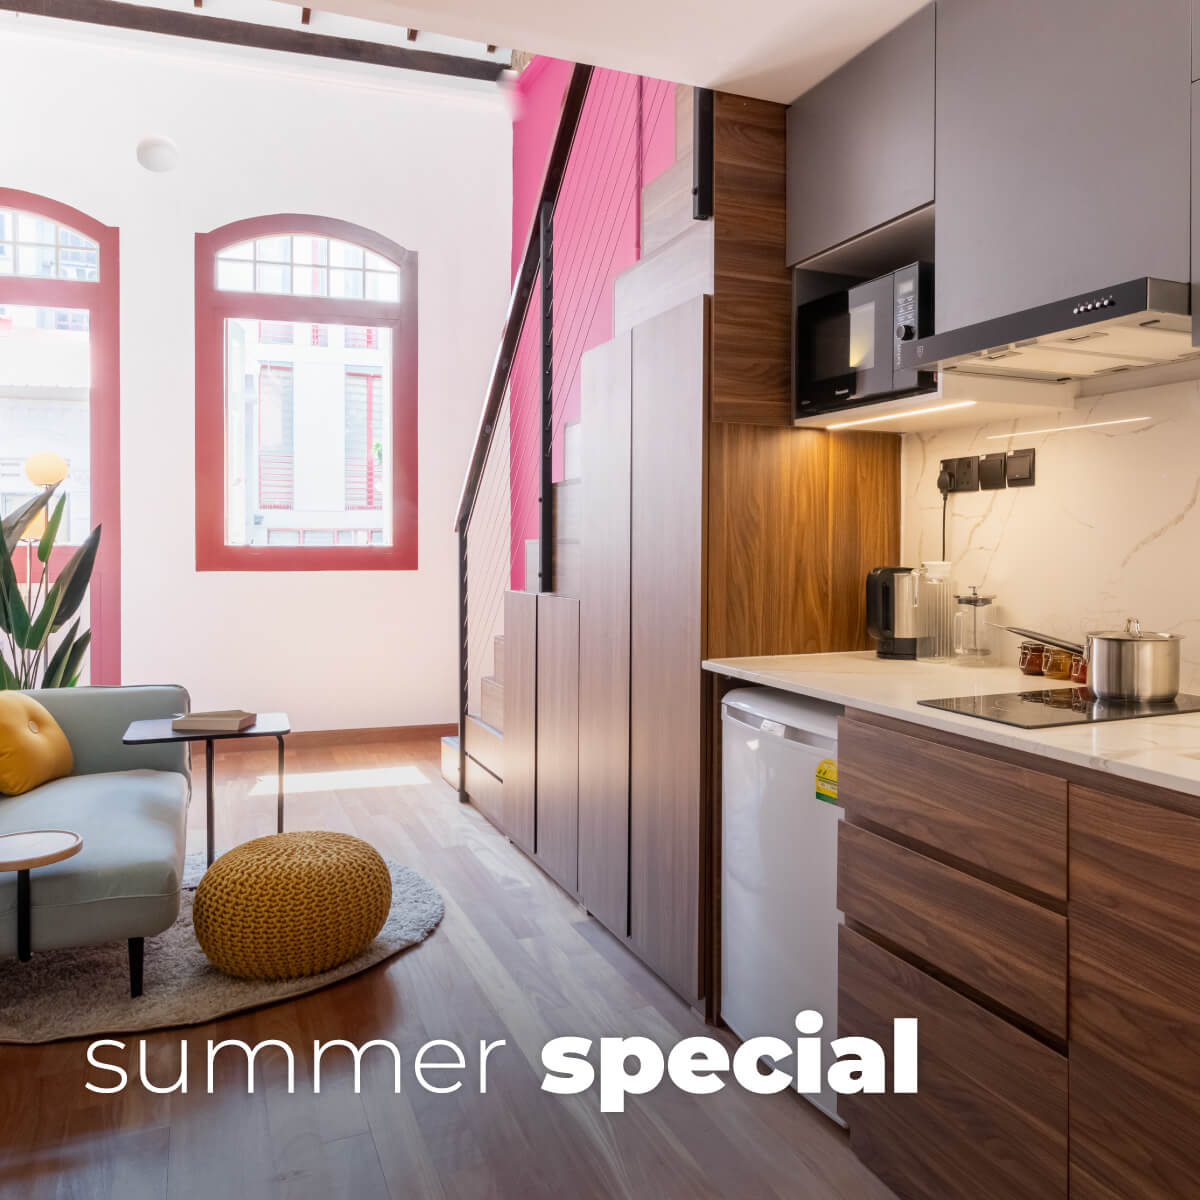 Summer special promotion for short term stay